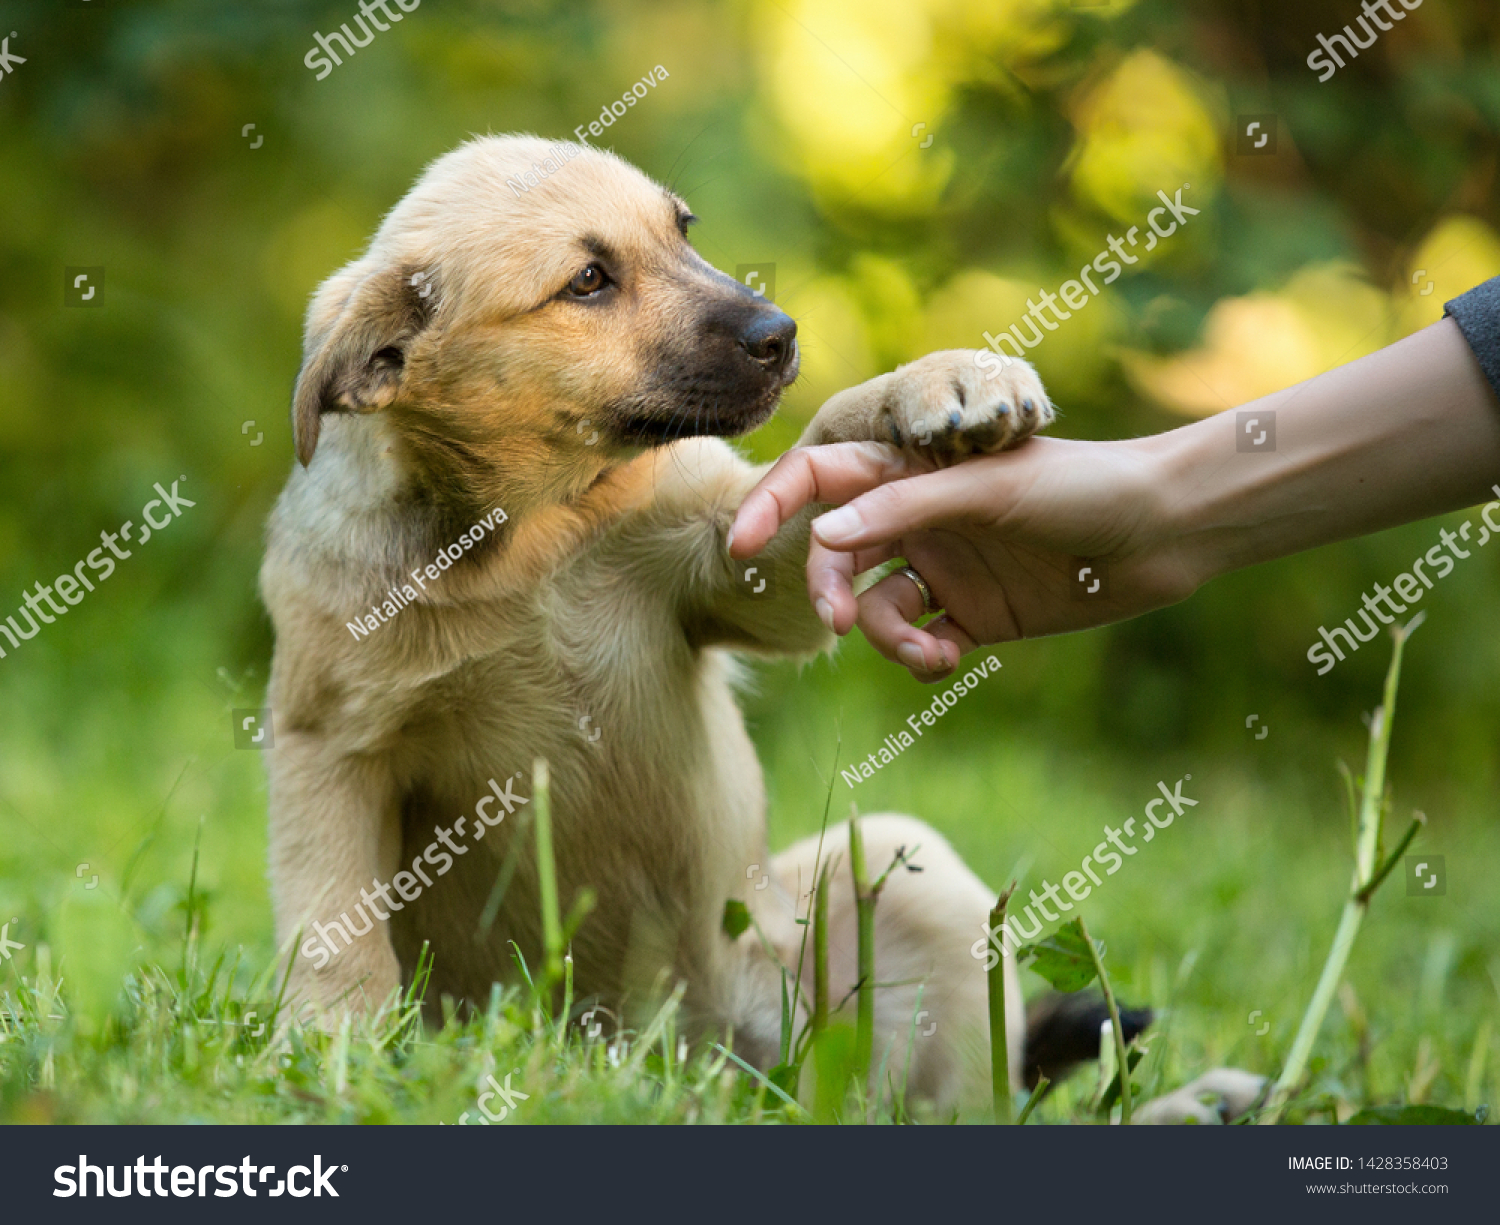 homeless puppy mixed breed mutt dog giving paw to human hand #1428358403